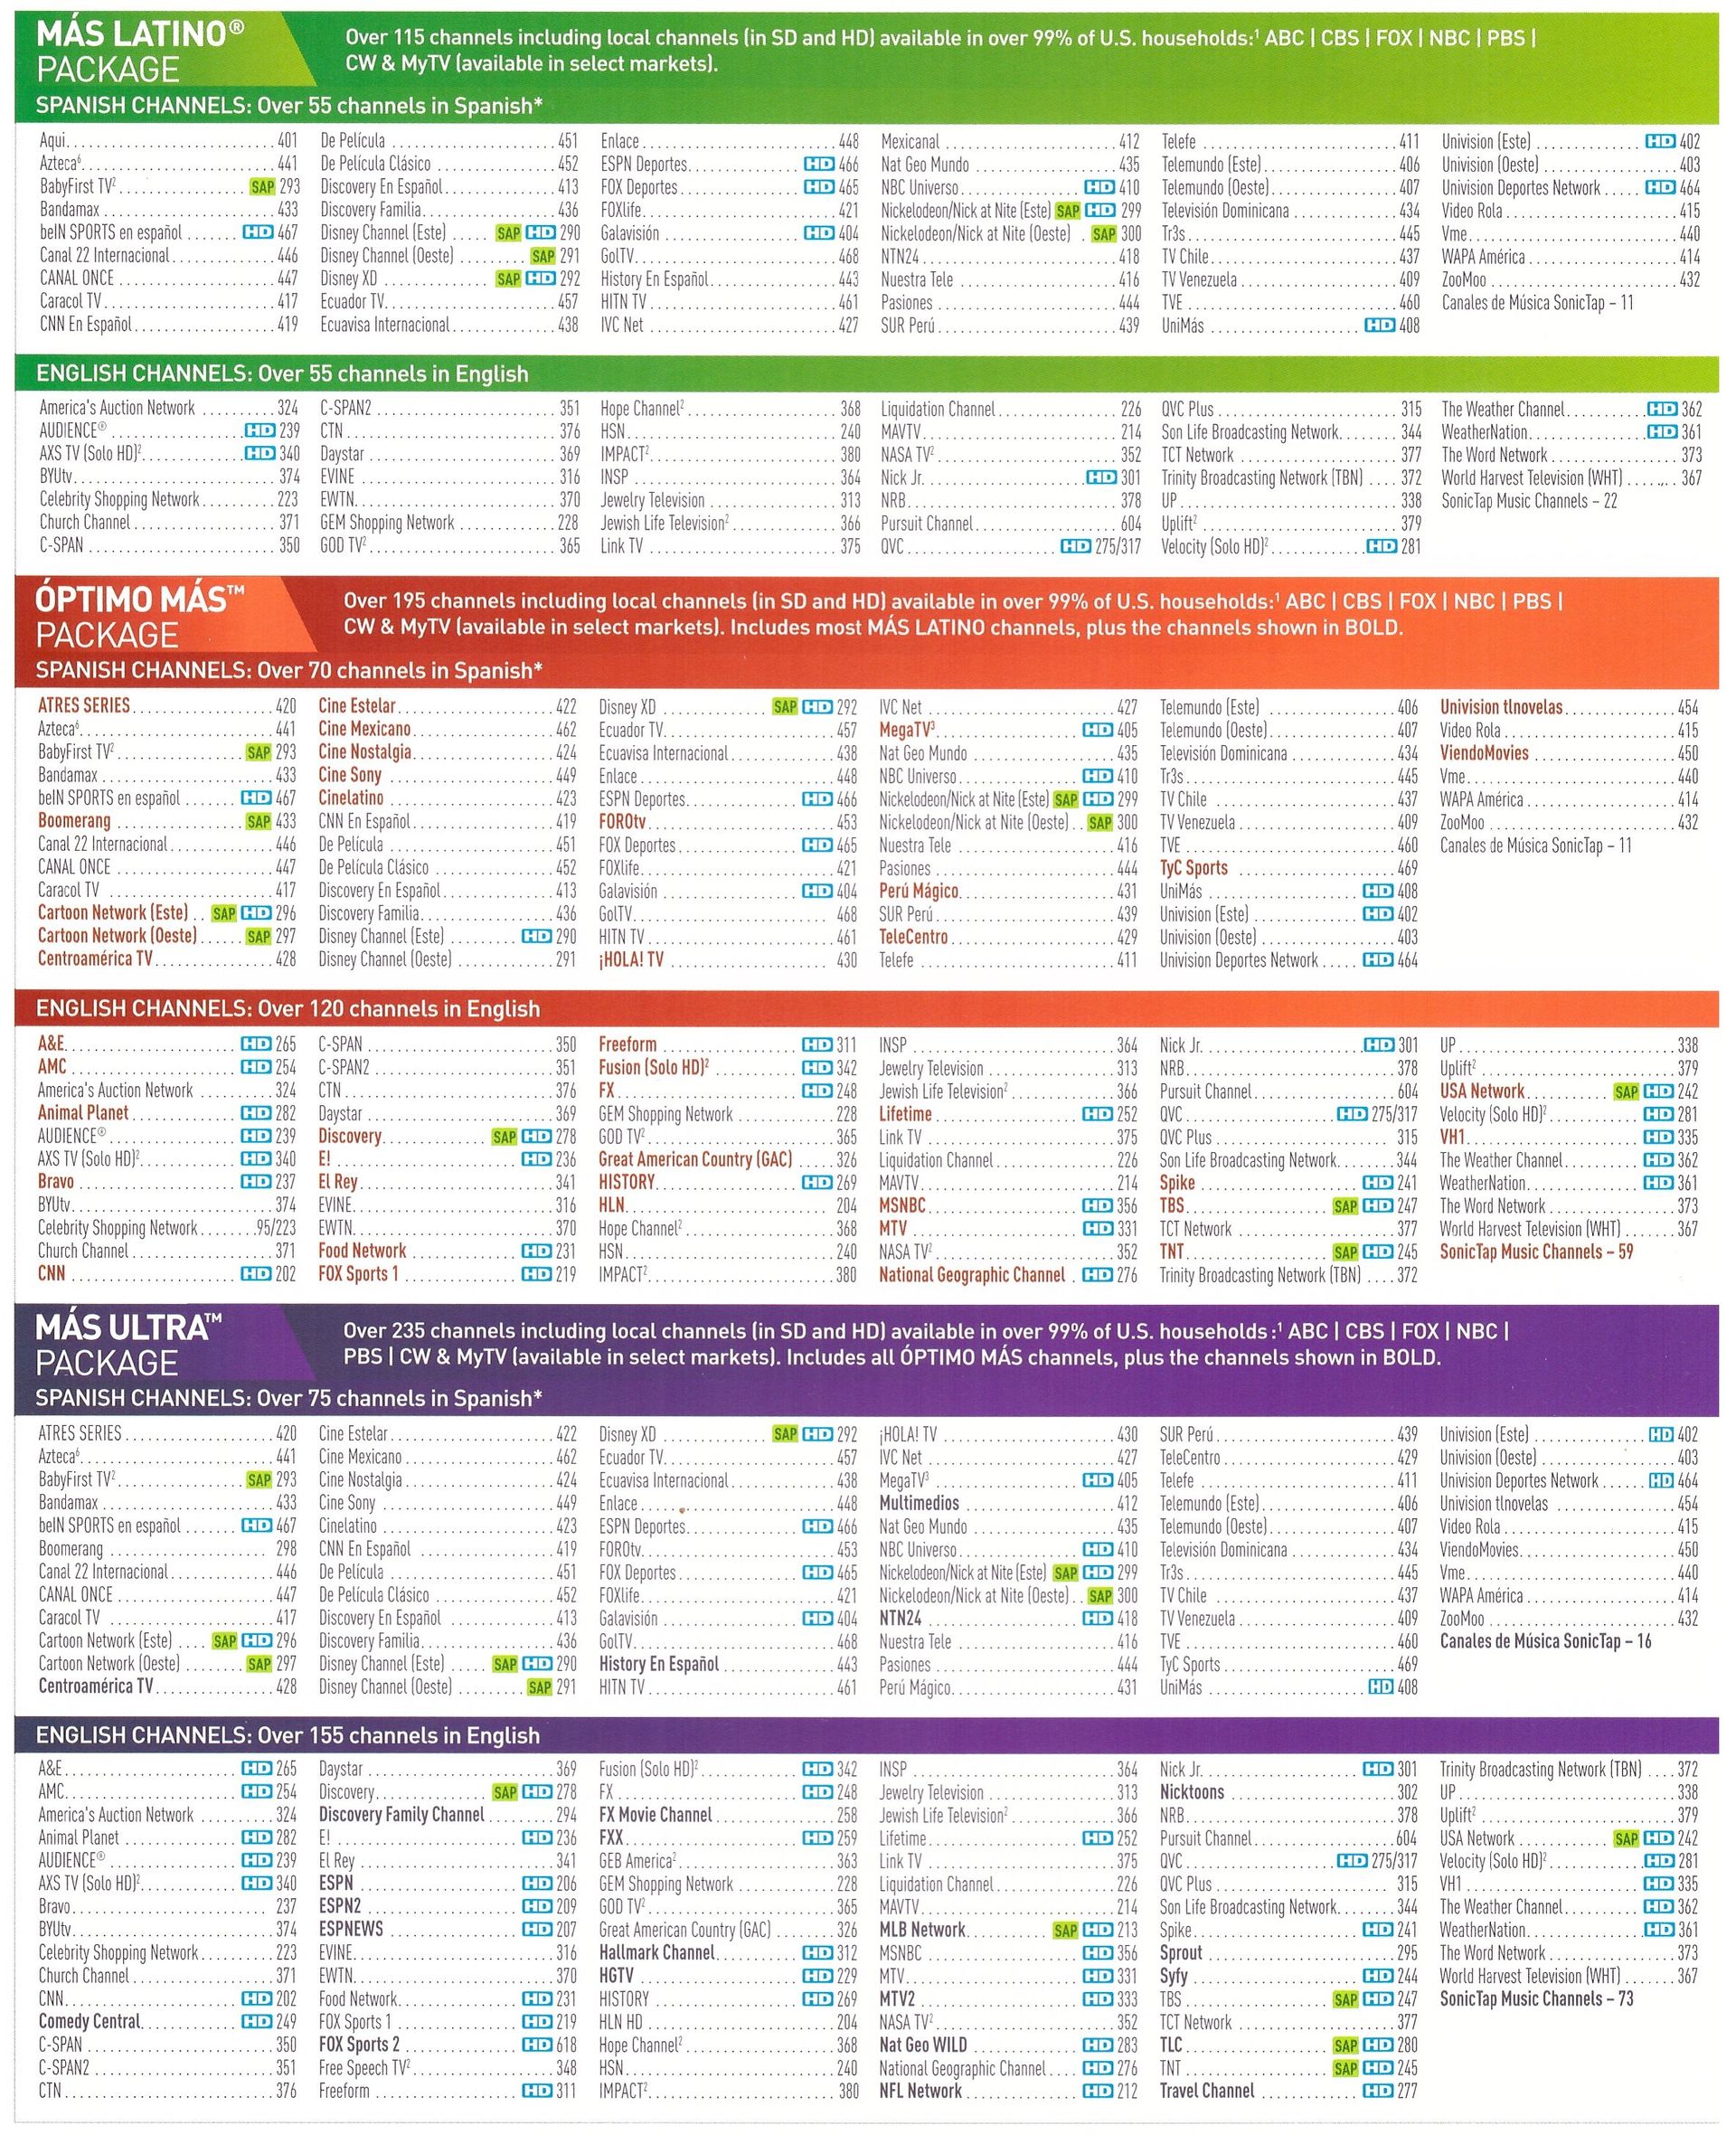 printable-directv-channel-guide